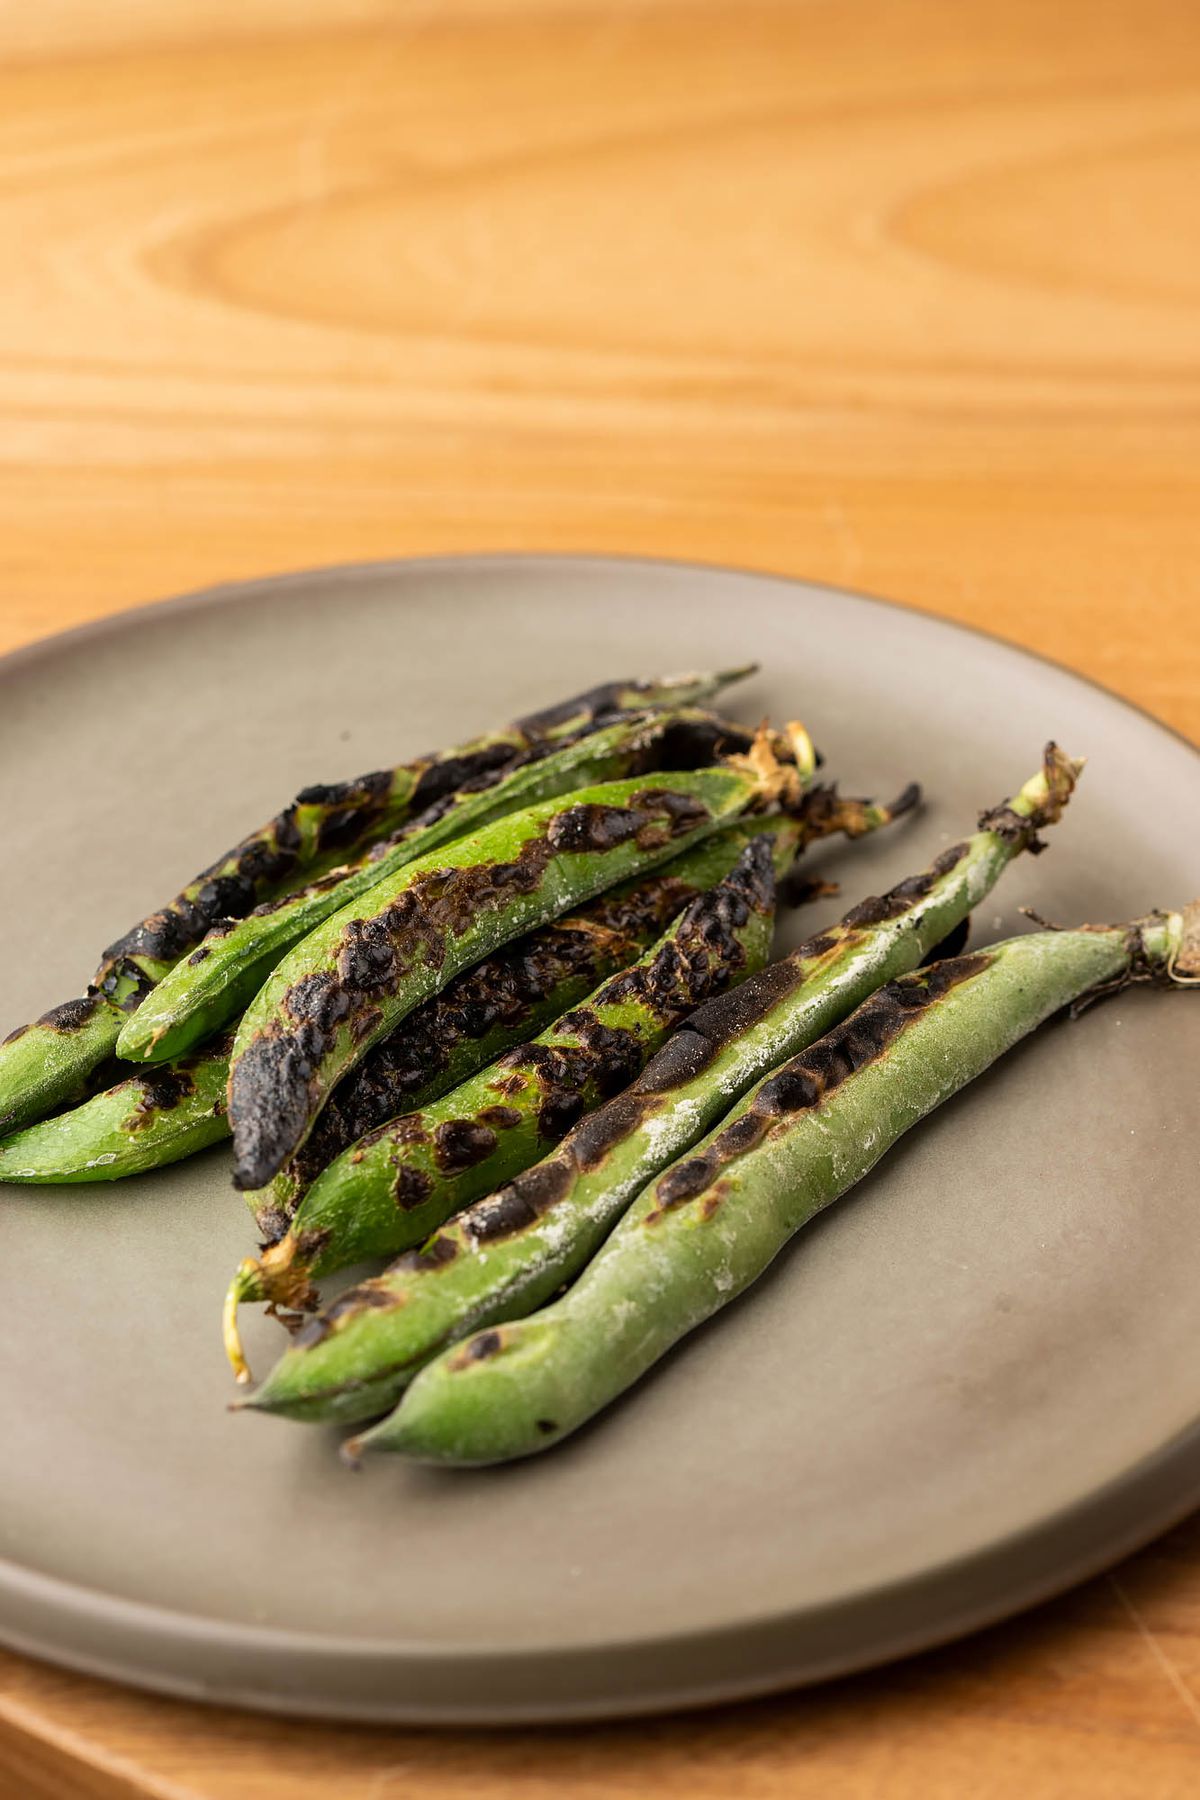 Seared long beans on a slate plate against a wooden table.